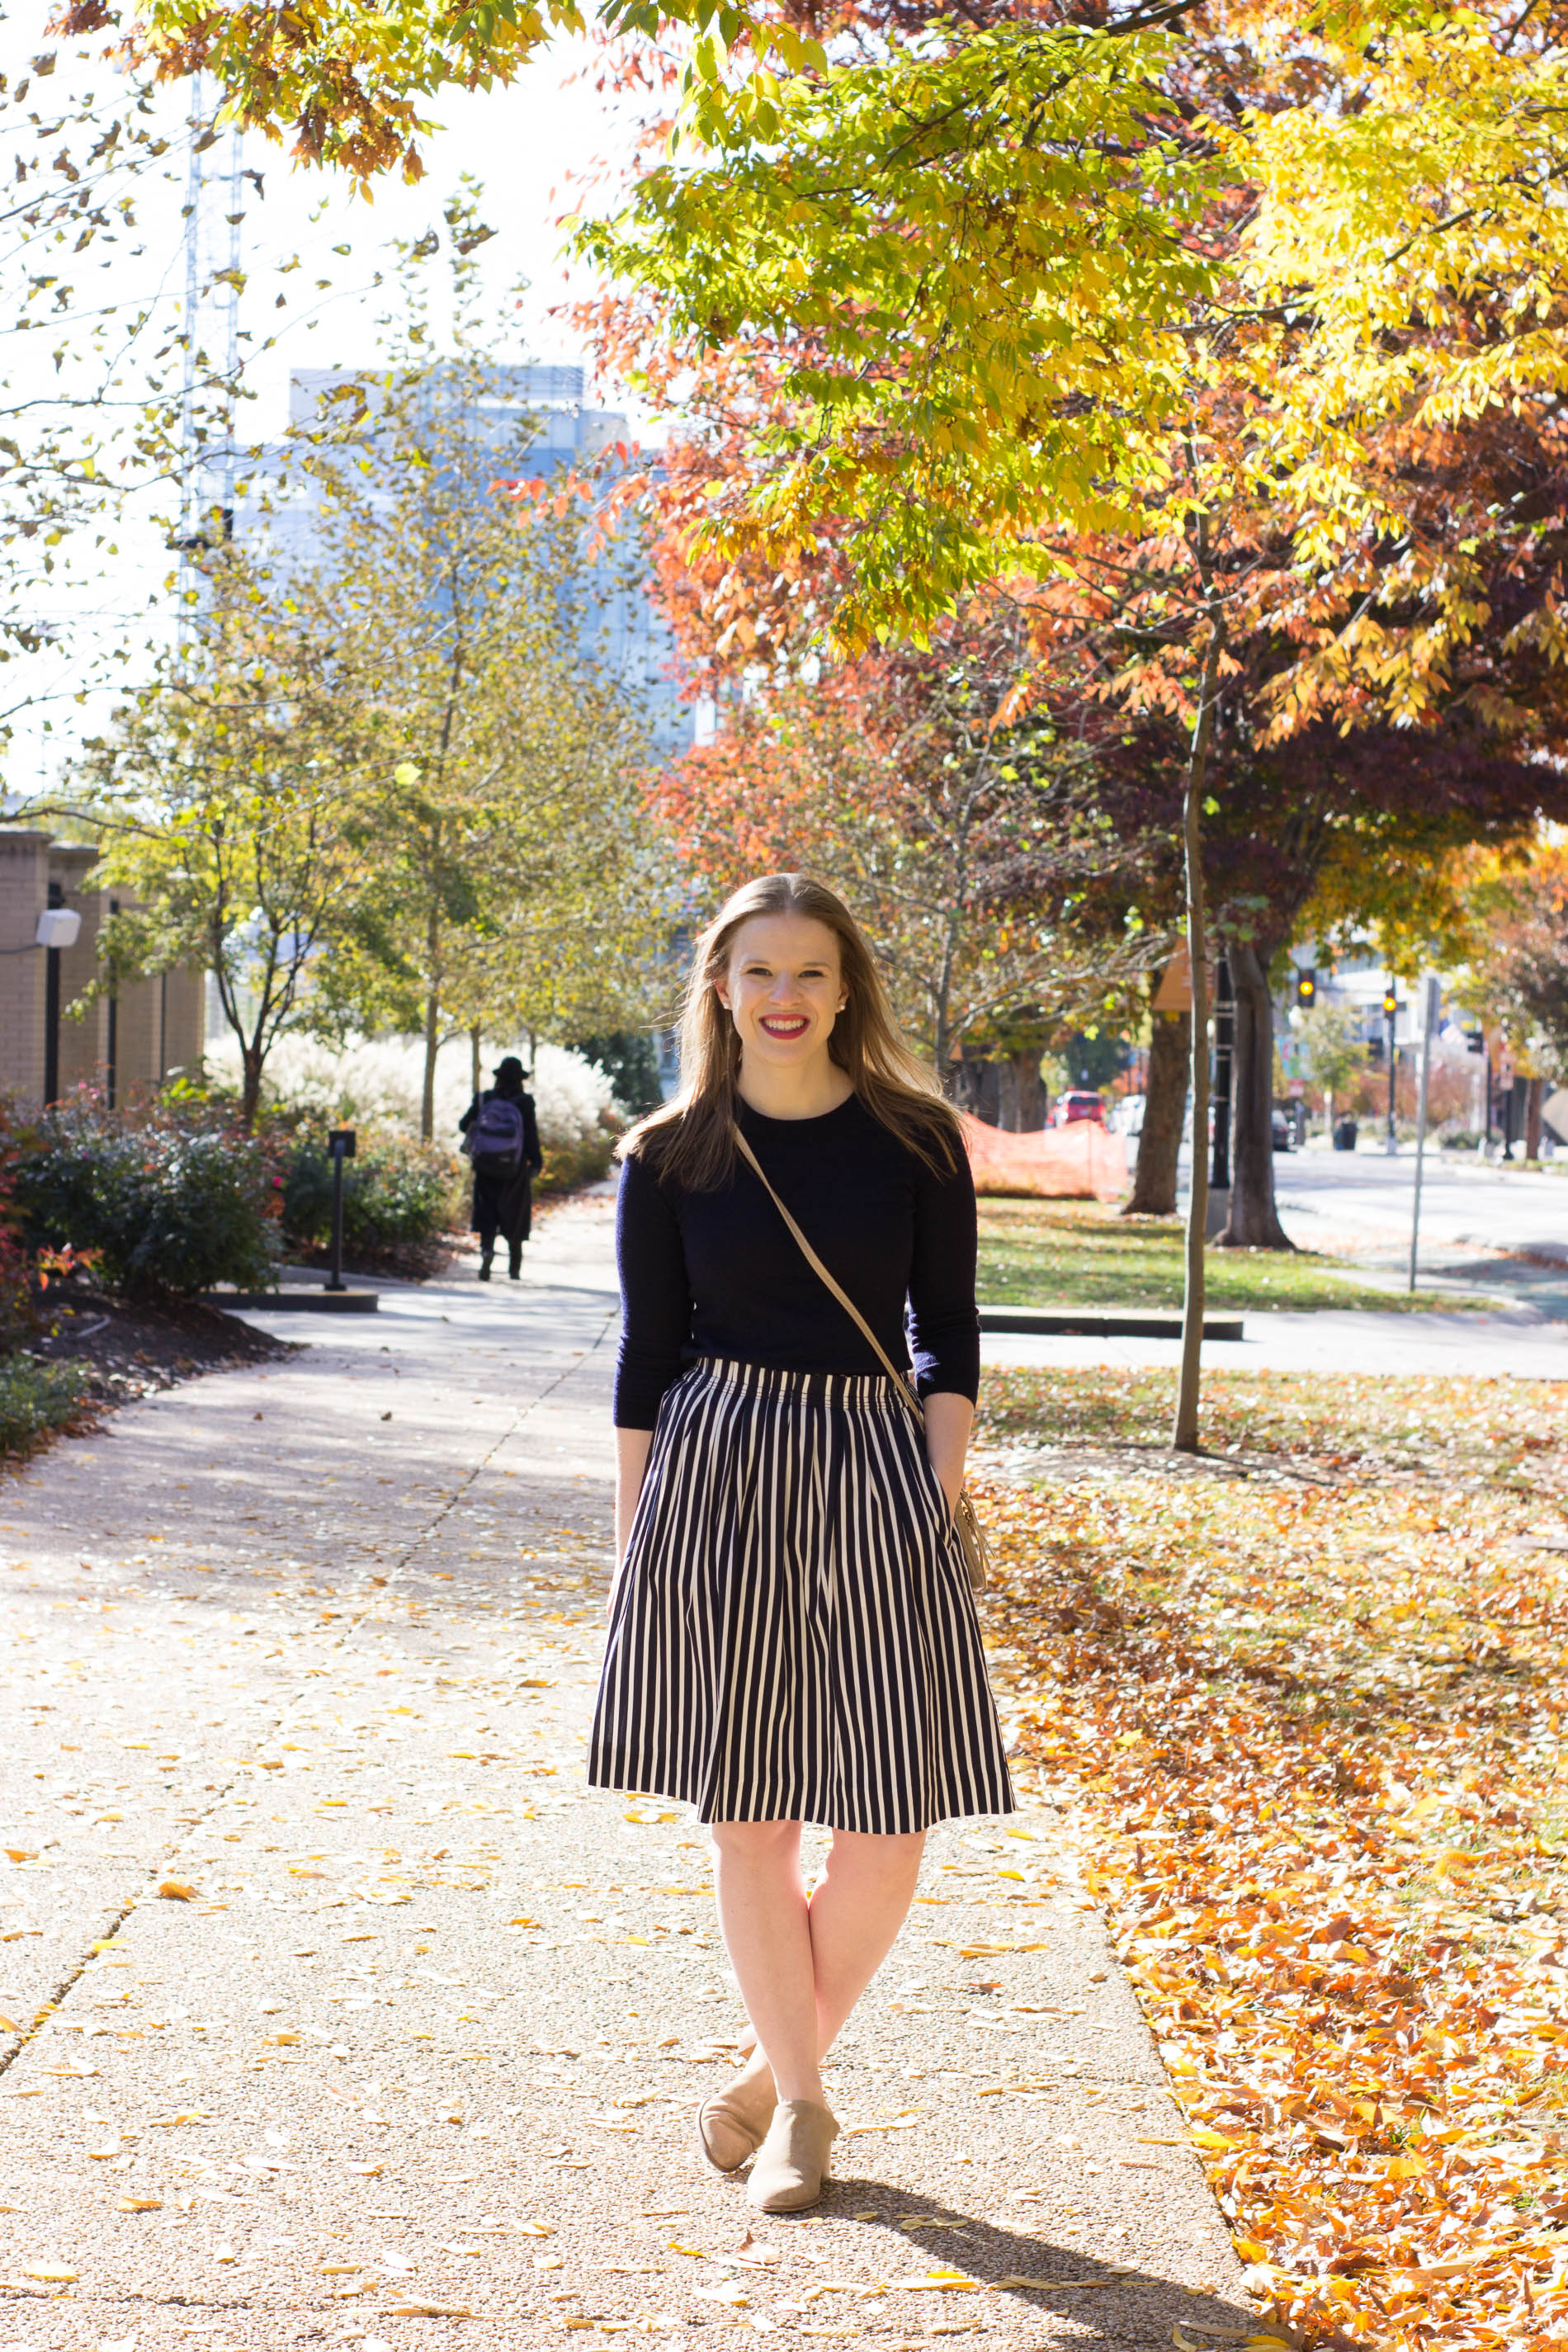 5 Easy Thanksgiving Outfit Ideas | Something Good, @danaerinw , women, fashion, clothing, style, clothes, holiday season, striped midi skirt, navy and white stripes, navy crew neck sweater, j.crew factory, j.crew, crossbody bag, everlane shoes, mules, heeled mules, thanksgiving ideas, fashion